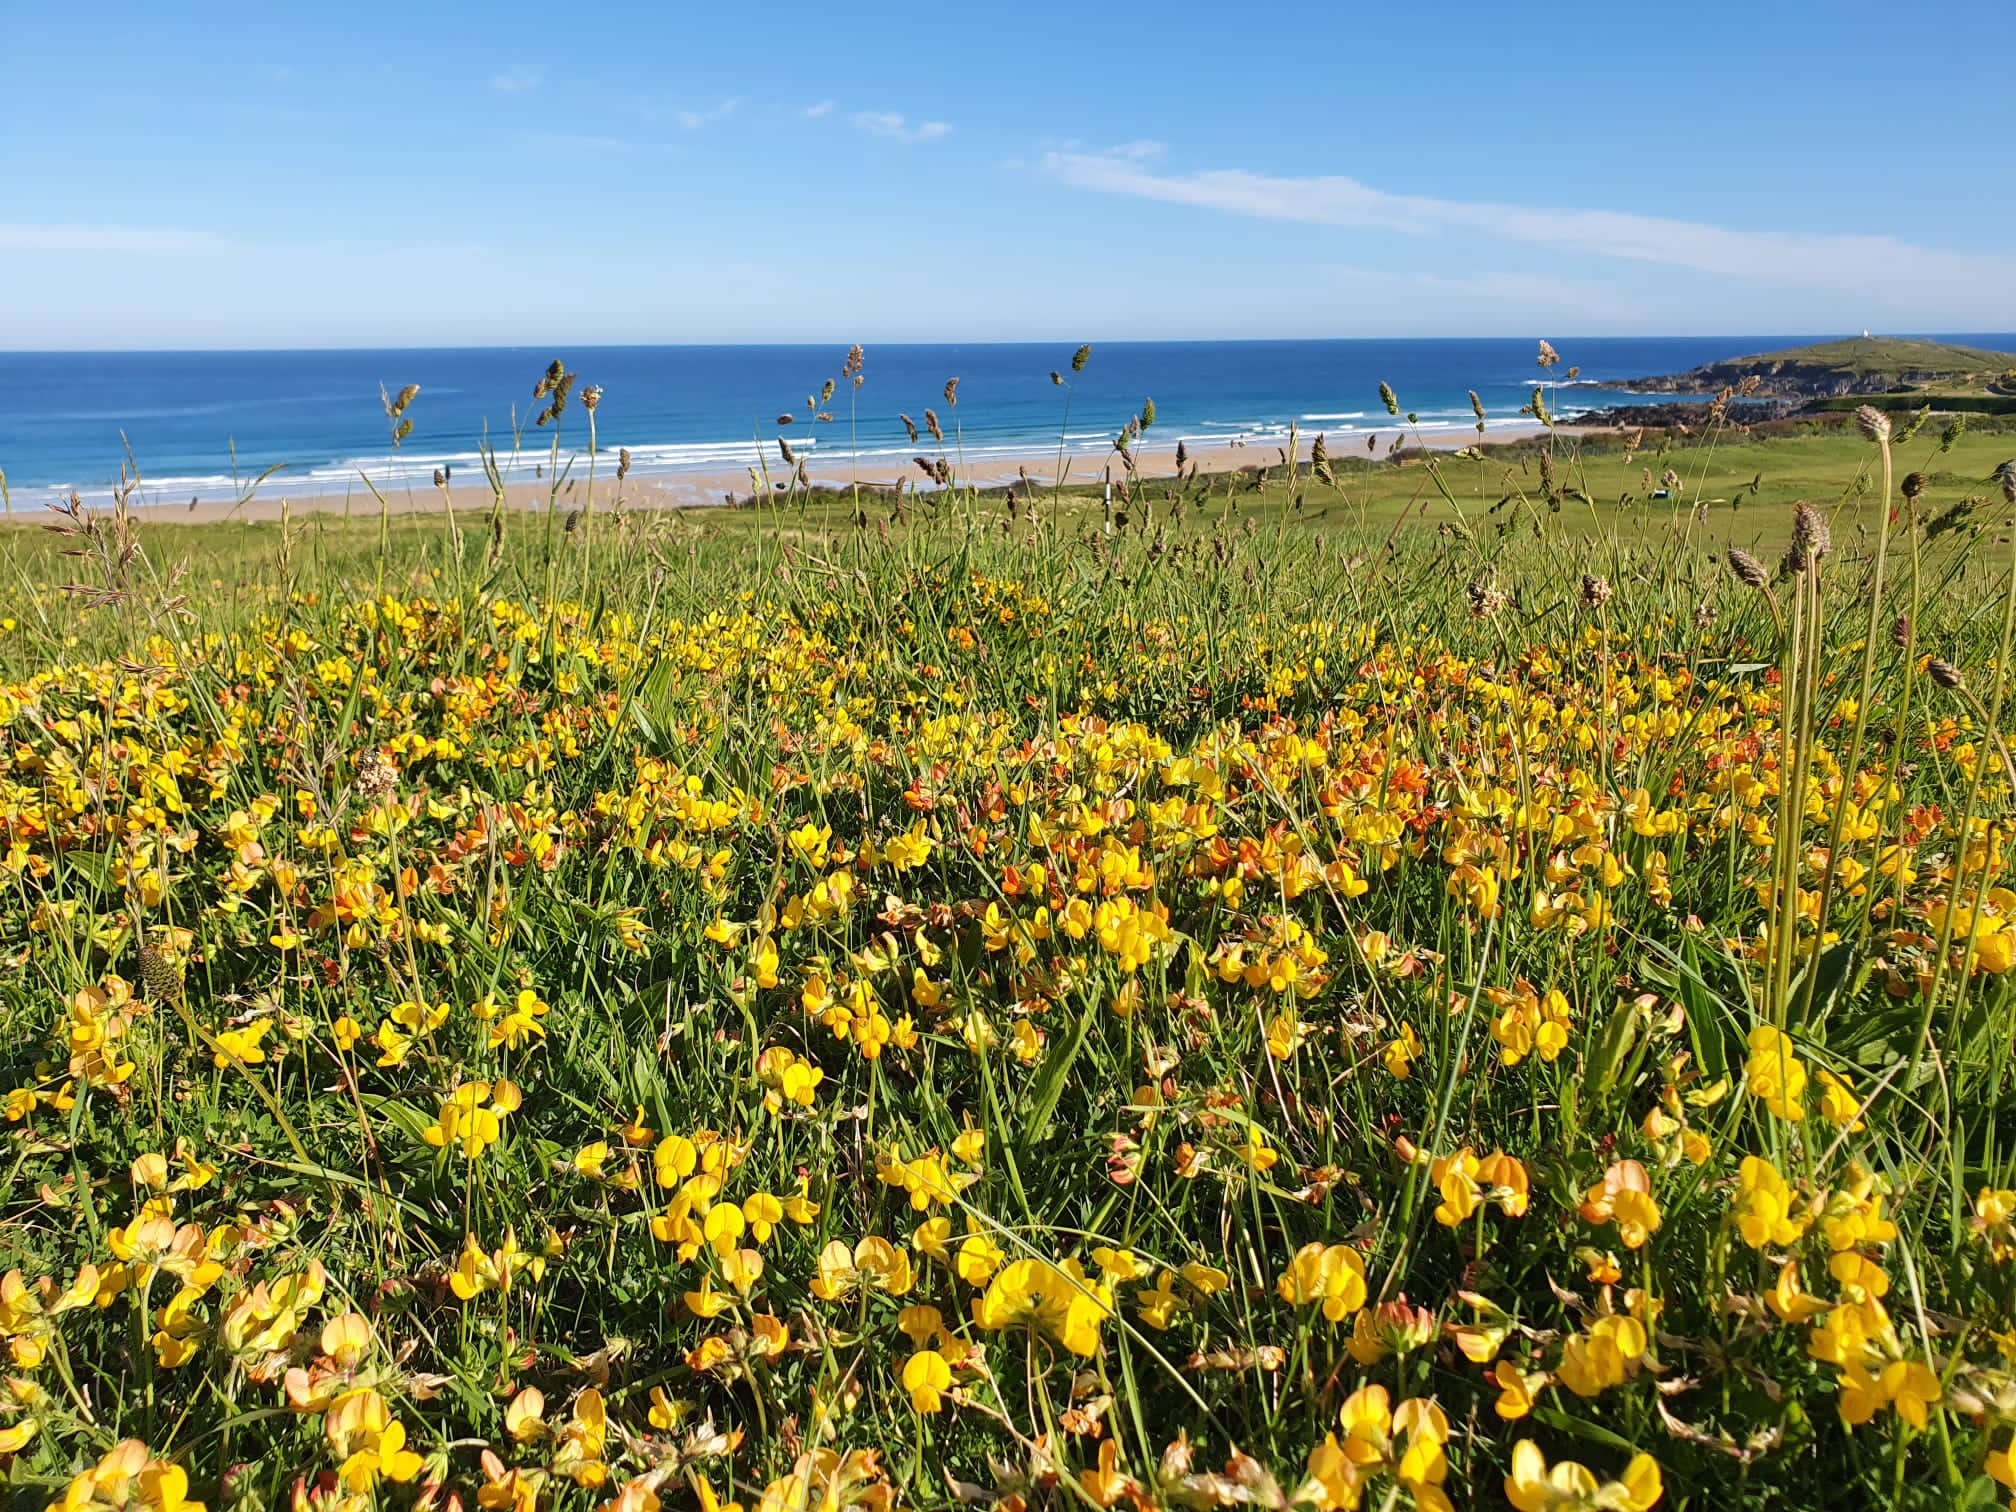 Newquay Golf Club out of play areas positively managed as attarctive habitats for pollinators